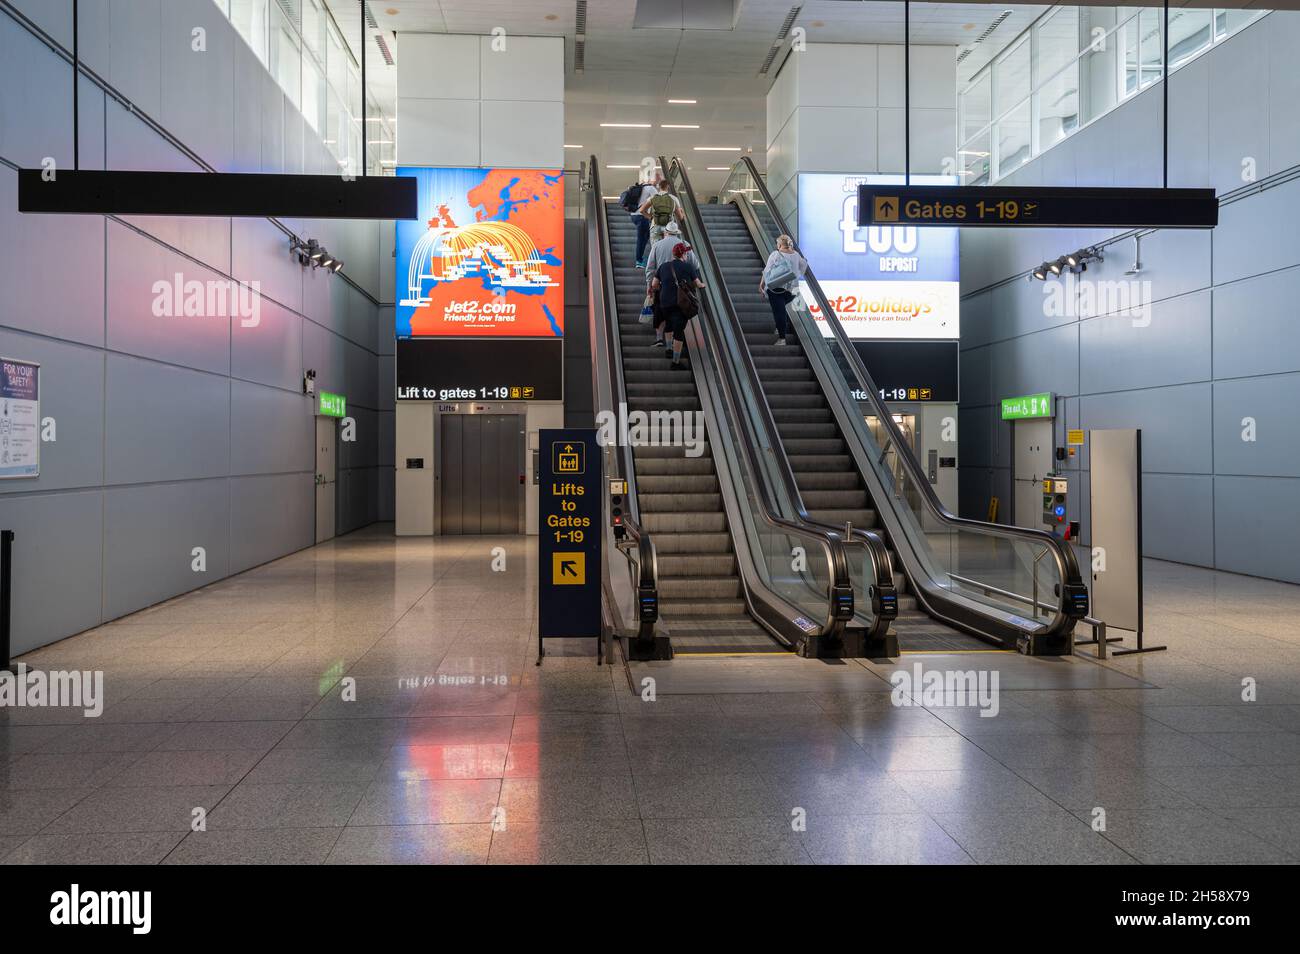 06/09/2021. Stansted Airport, UK. A few passengers with hand luggage on escalators heading towards departure gates. Stock Photo